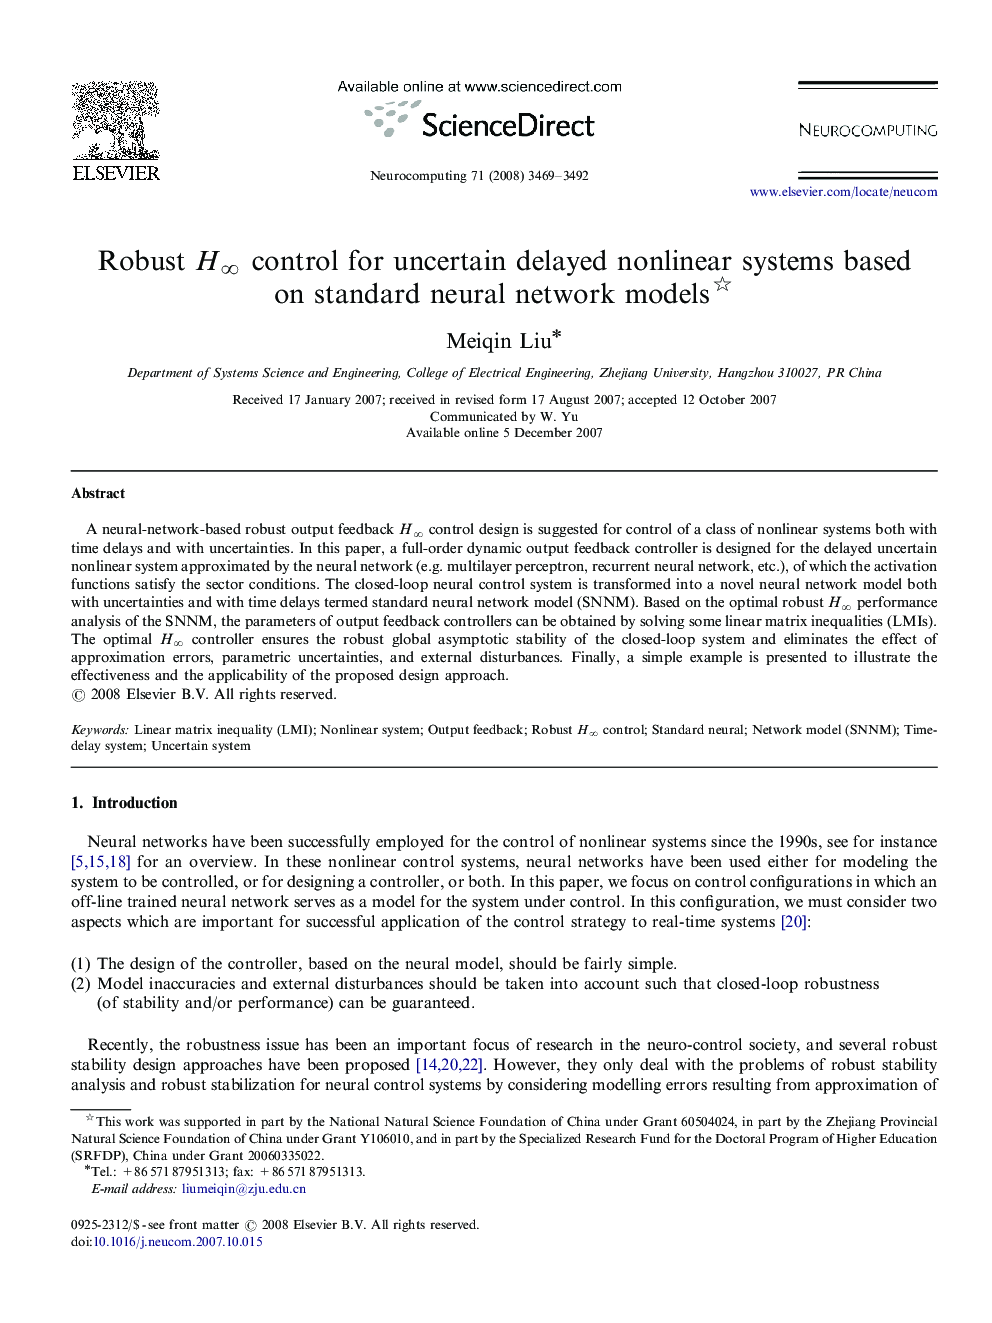 Robust H∞ control for uncertain delayed nonlinear systems based on standard neural network models 